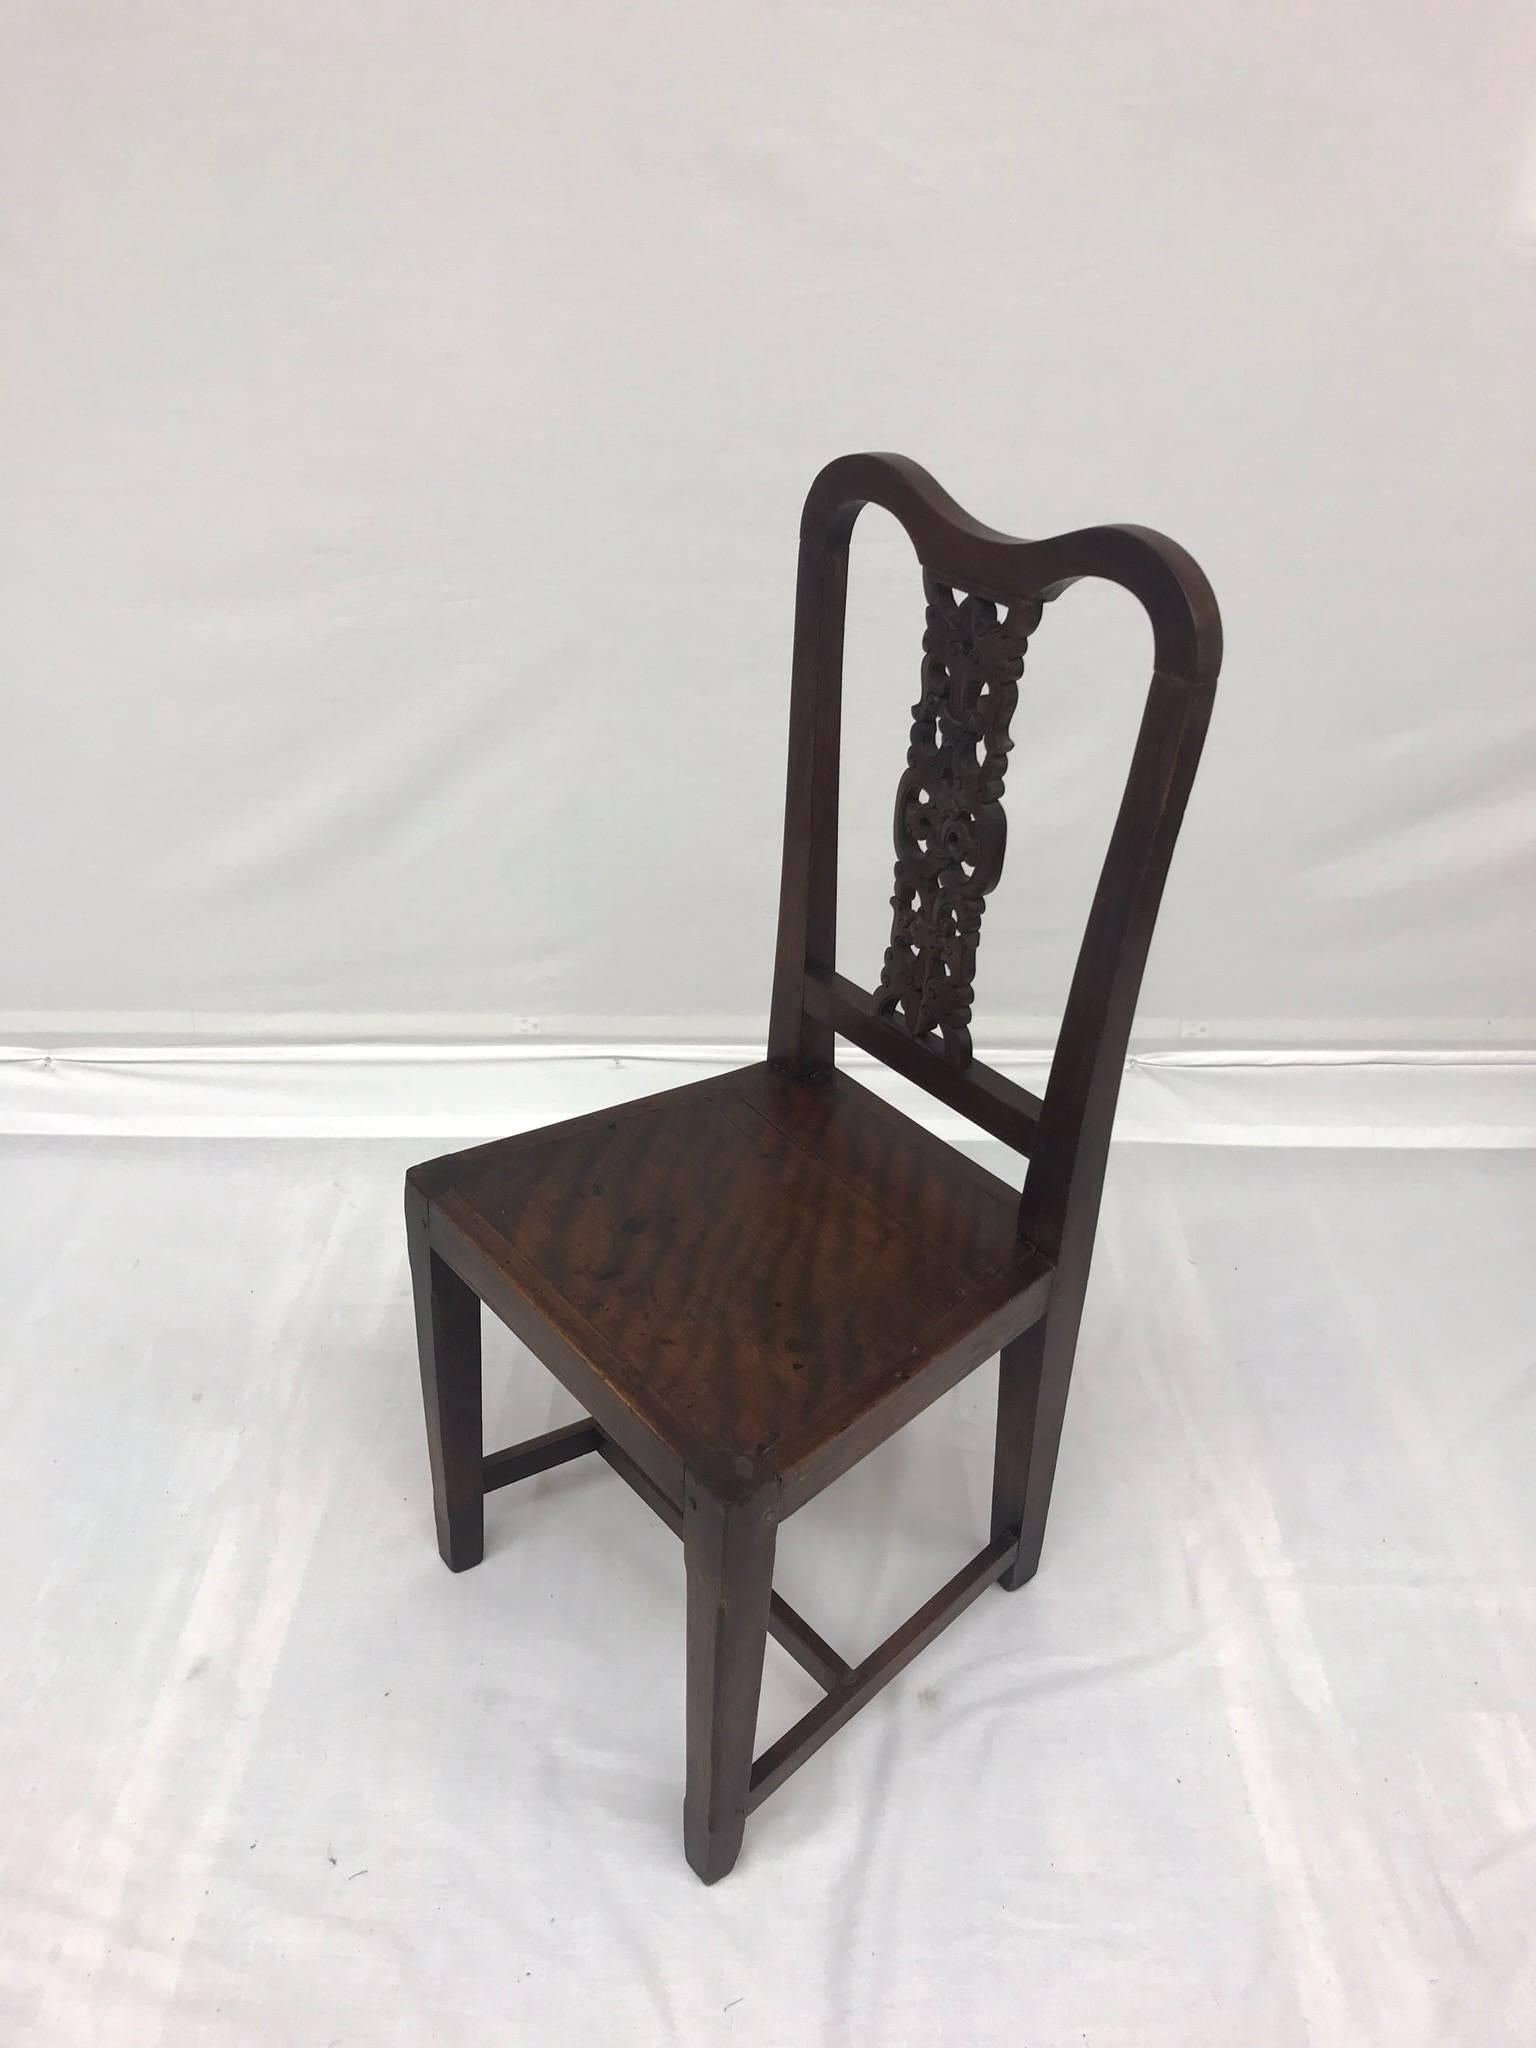 A wonderful, beautifully carved wood Chinese chair that dates to the late 19th century. Perhaps the perfect hall chair or side chair.
Seat dimensions: 17